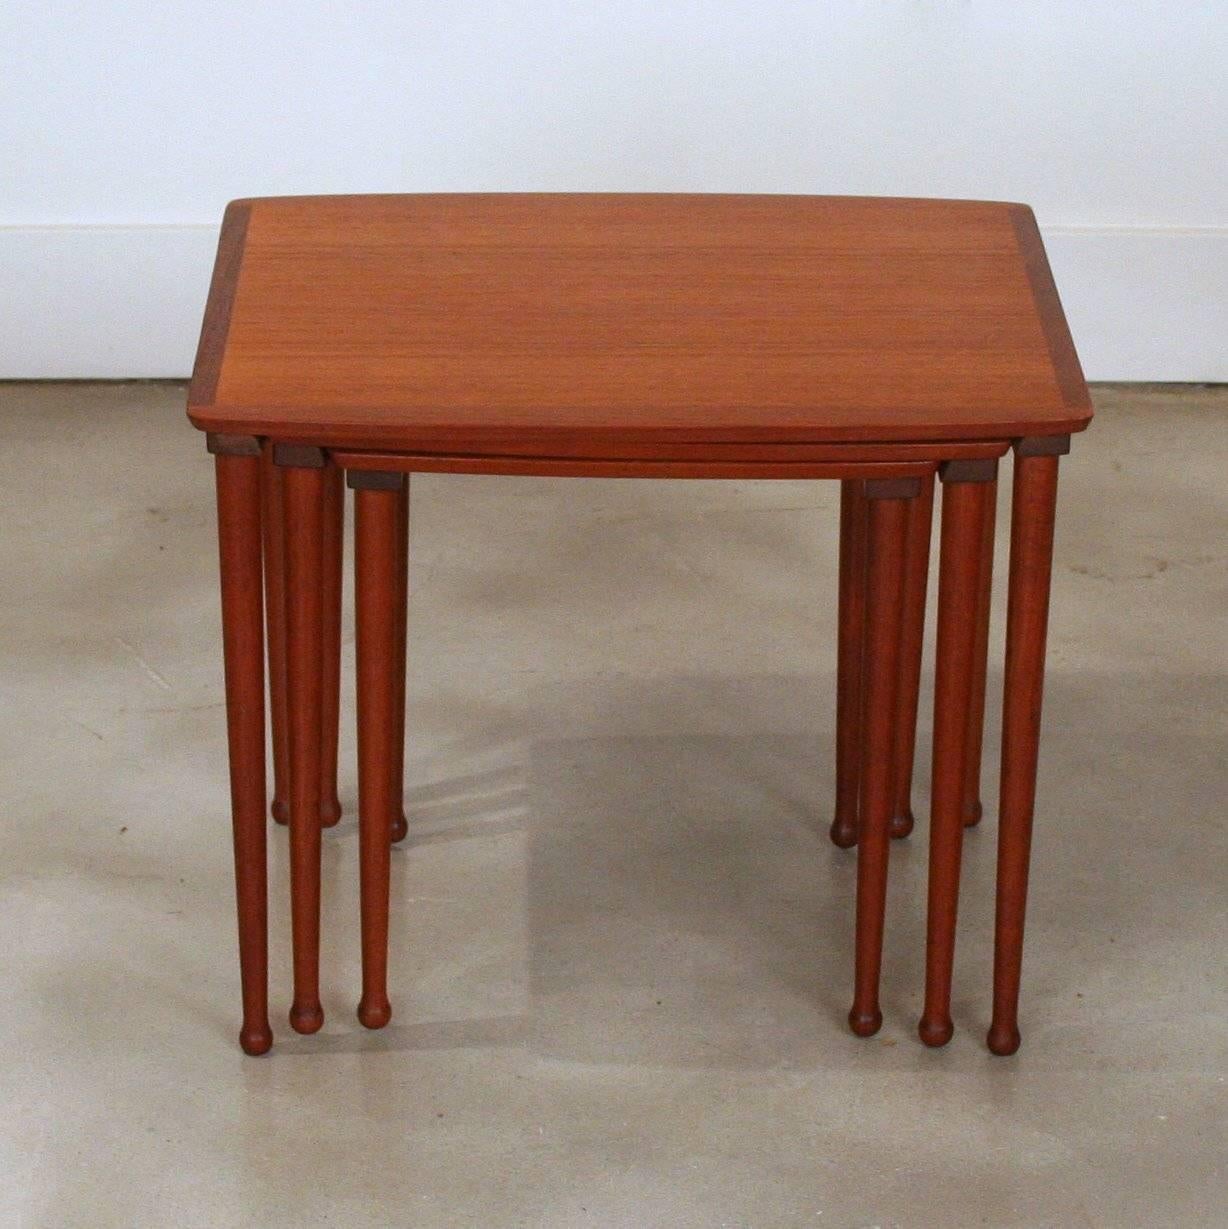 Vintage teak nesting tables with beautiful leg detailing and wonderful design means that they nest perfectly. Features inset finger pulls underneath each table. Made in Denmark.